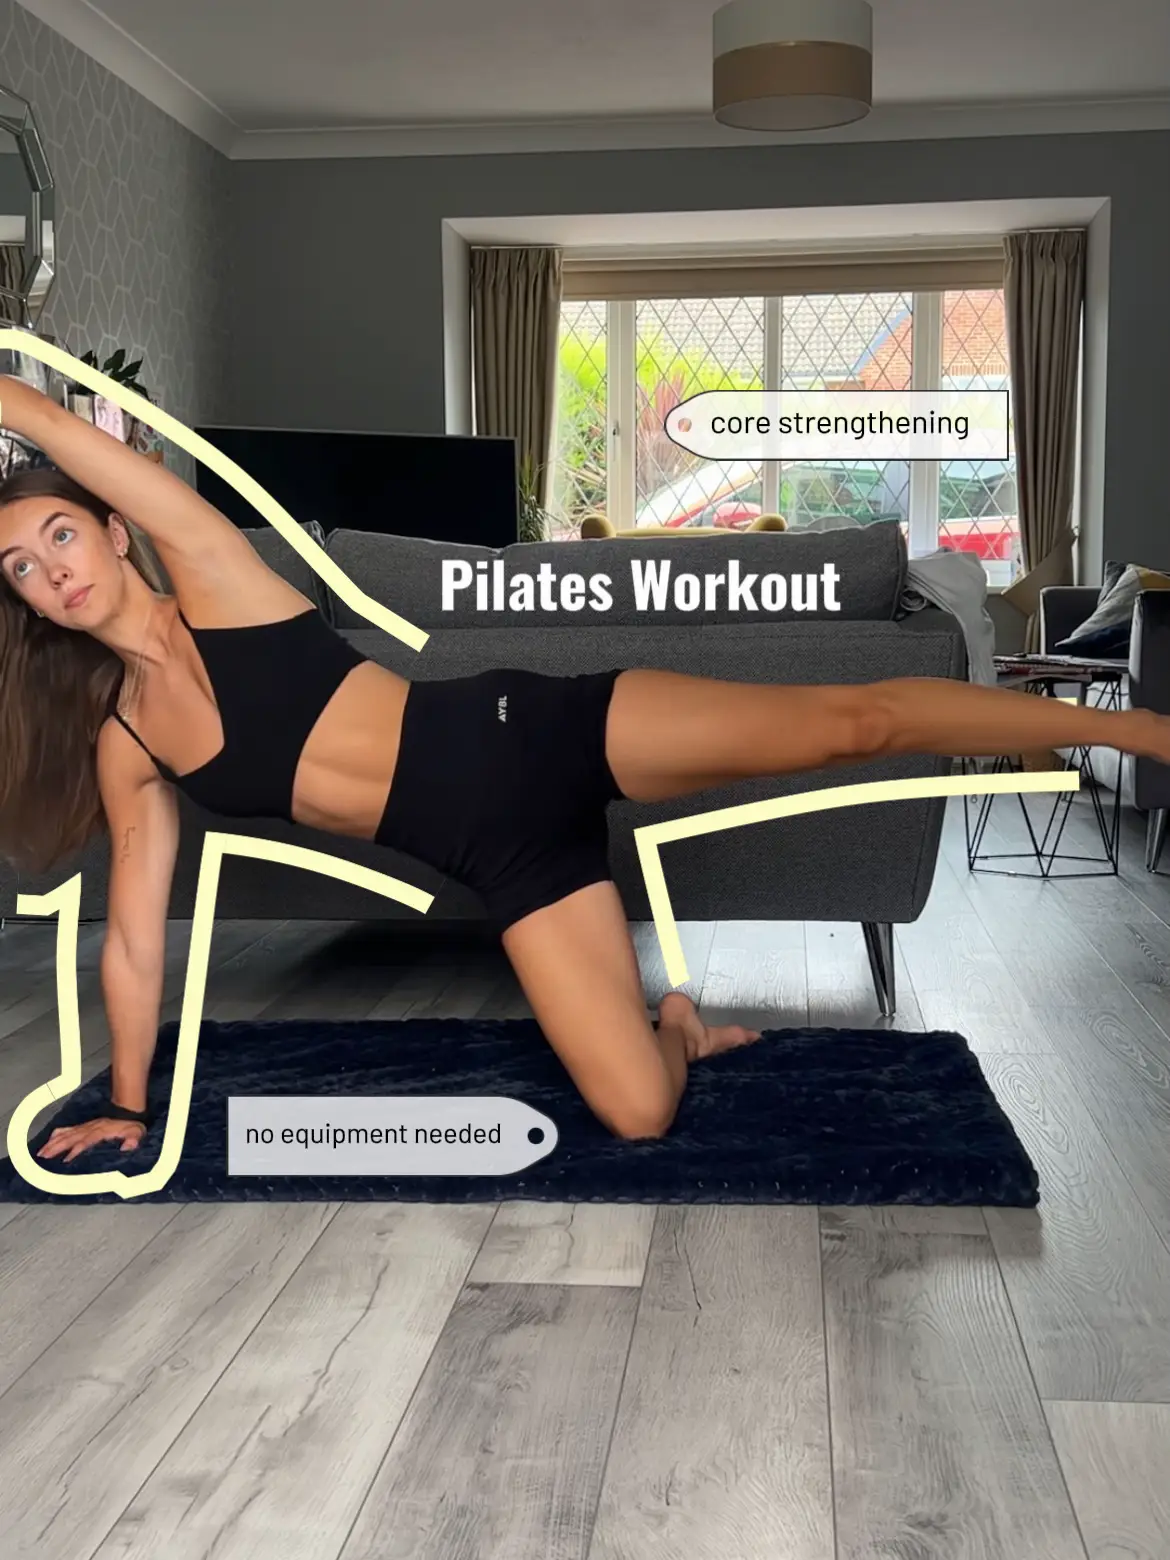 7-Minute Pilates Ab Workout For A Tight Core ⋆ Laura London Fitness